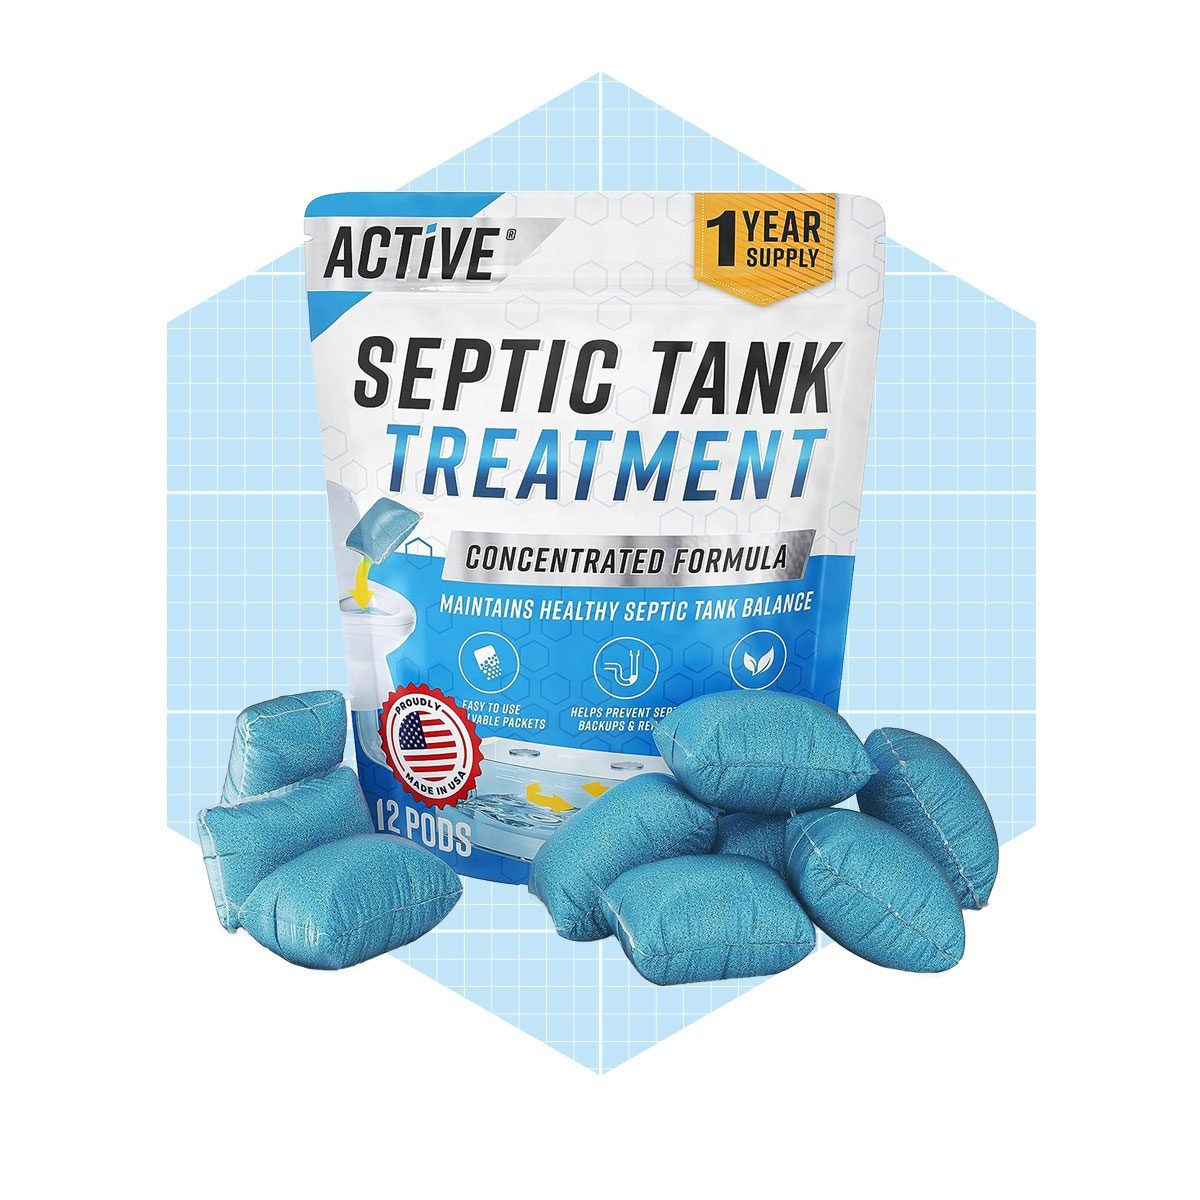 These New Septic Tank Treatment Pods from Active Ensure Your System Runs in Tip-Top Shape